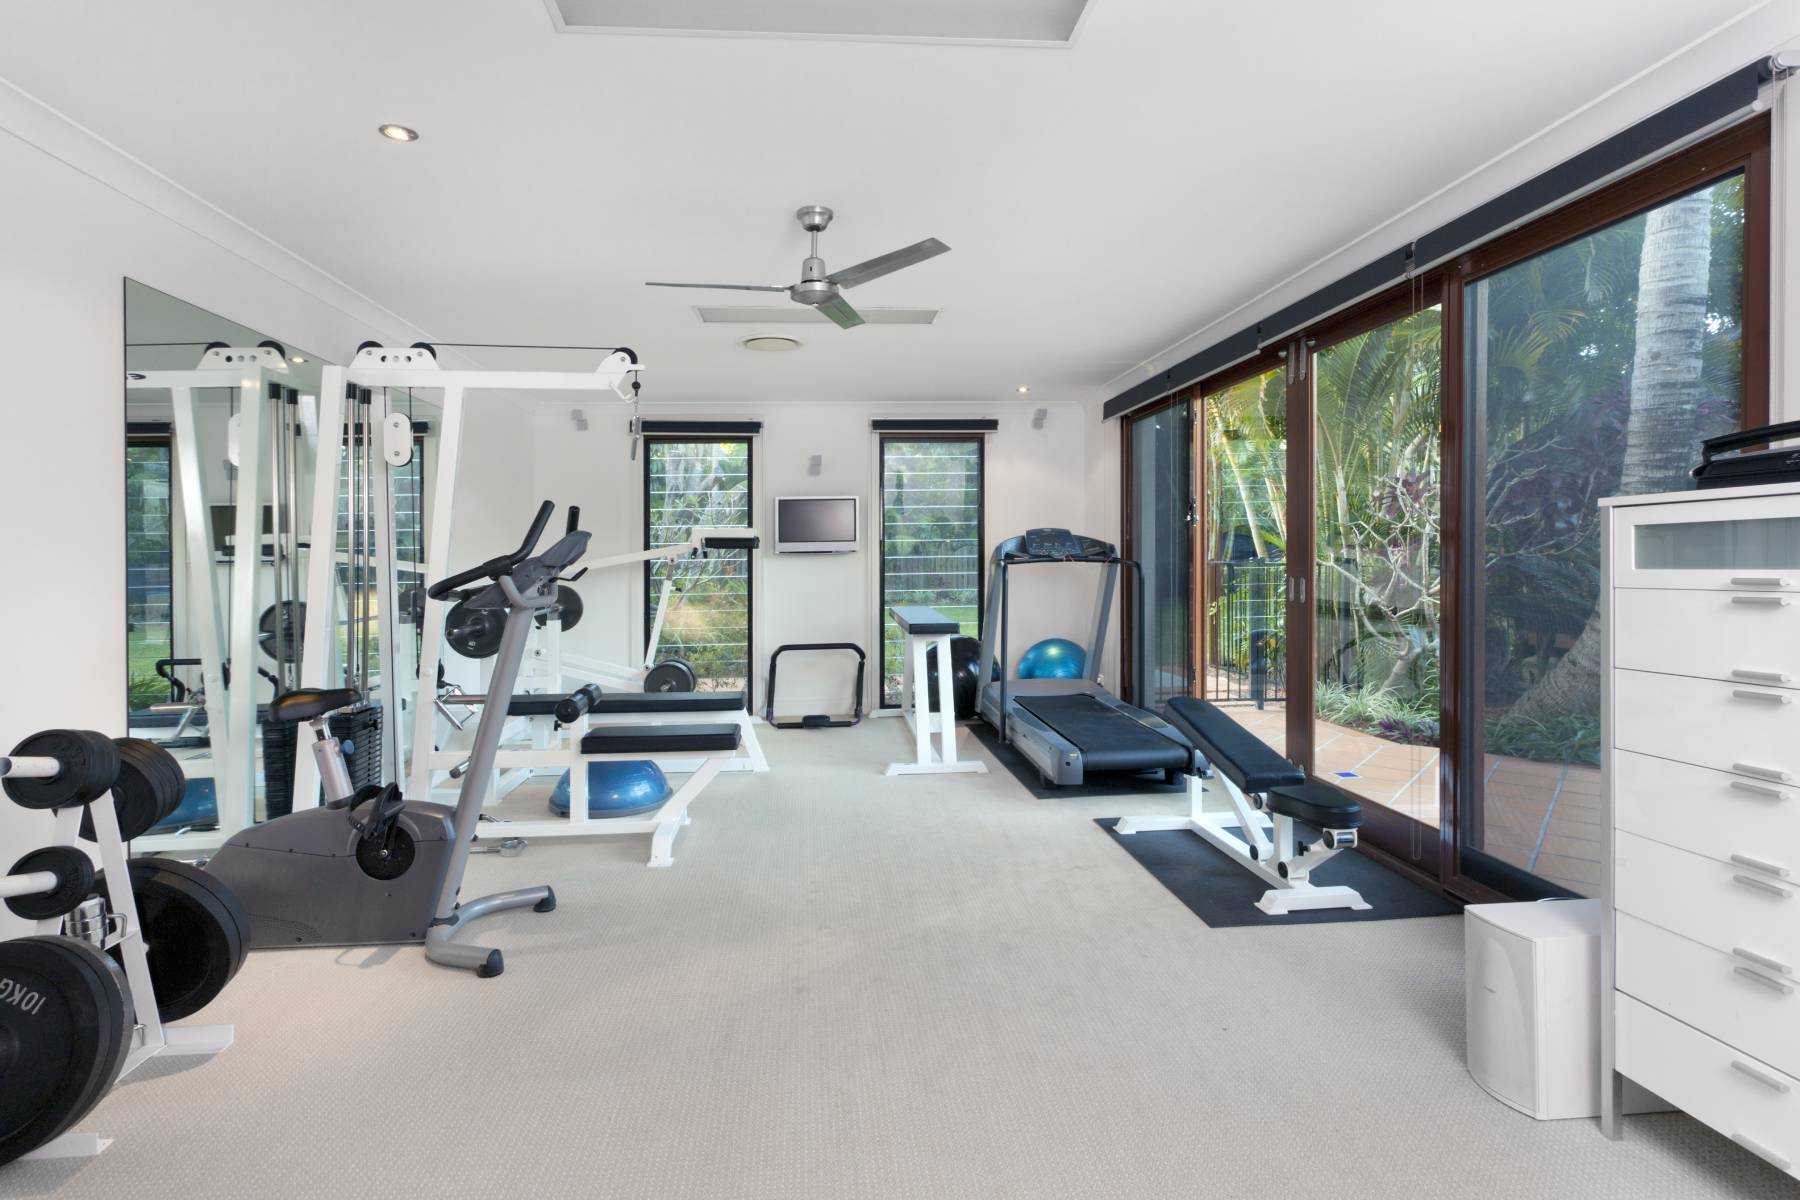 10 tips on how to build a home gym